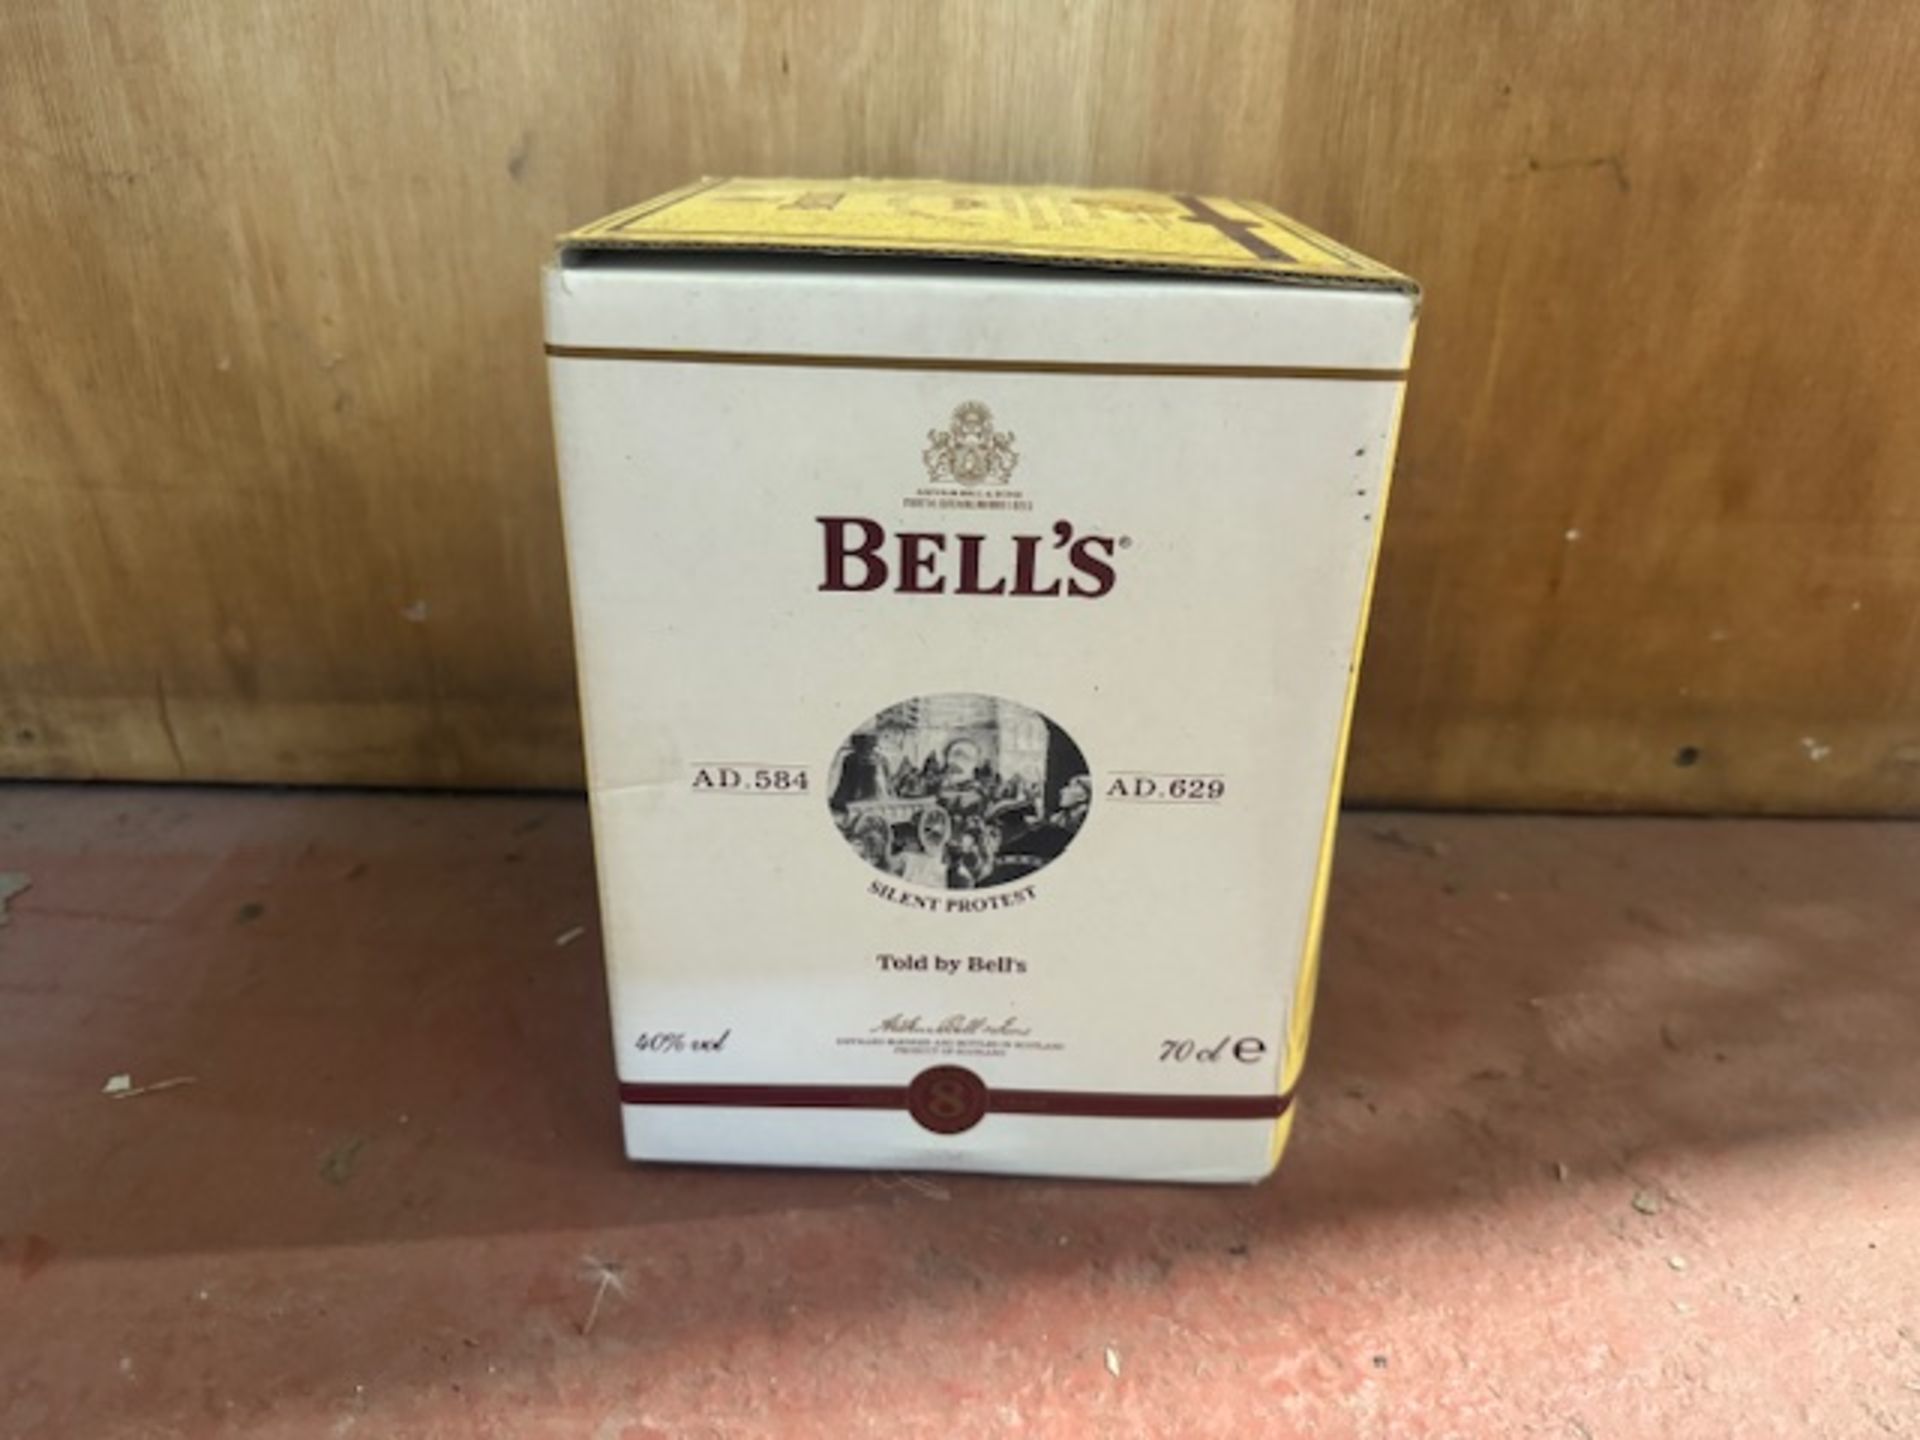 FULL 15 PIECE COLLECTION OF BELLS WHISKEY DECANTERS UNOPENED - Image 11 of 16